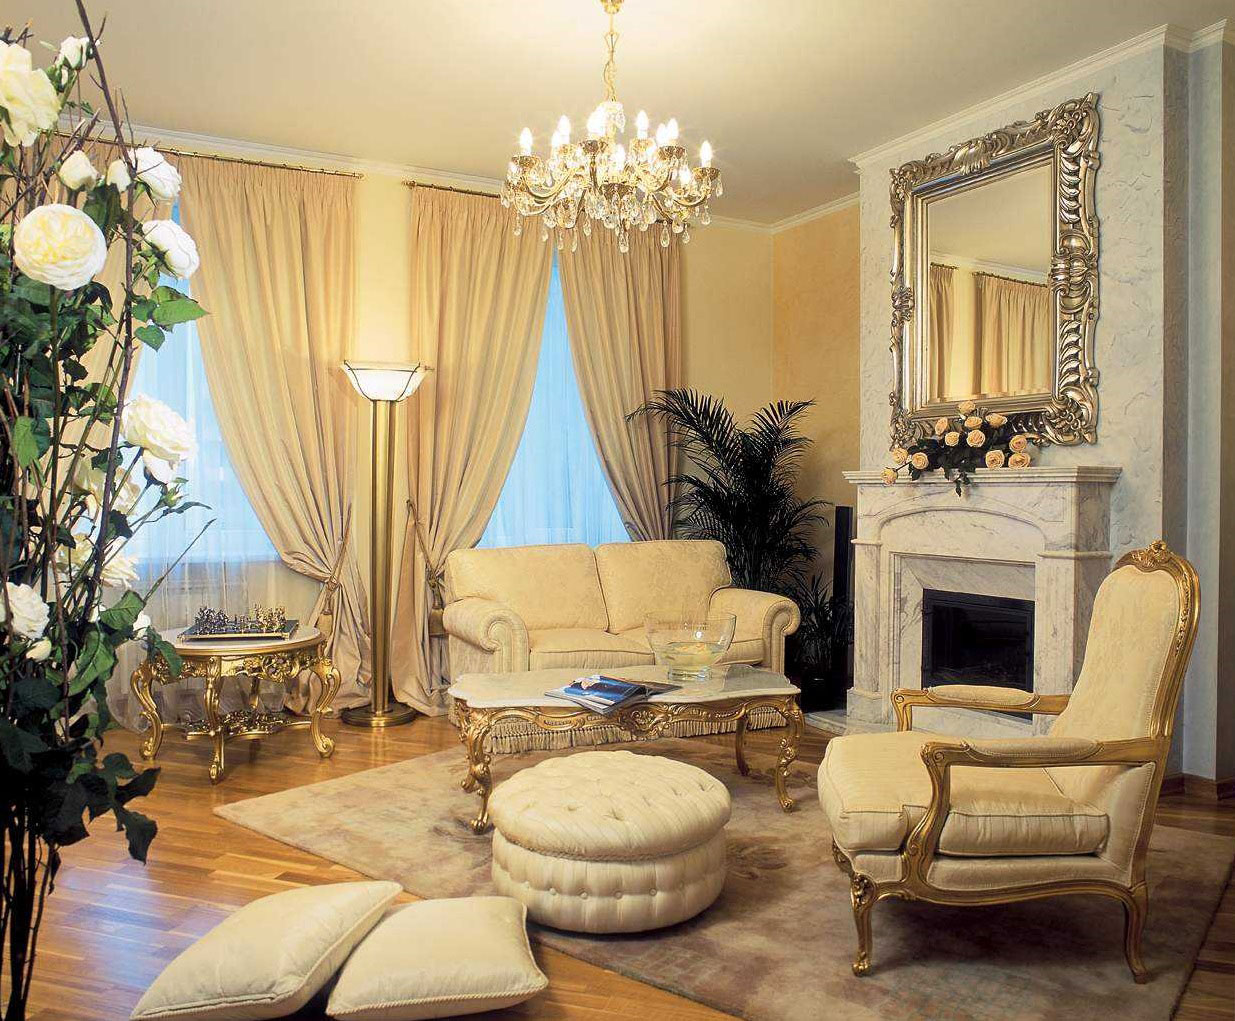 Living Room With Glamorous Living Room Decor Ideas With Crystal Chandelier Lighting Furnished With White Sofa And Chair Plus White Table And Round Ottoman On Thick Rug Living Room The Best Living Room Decor Ideas That You Can Fix By Yourself